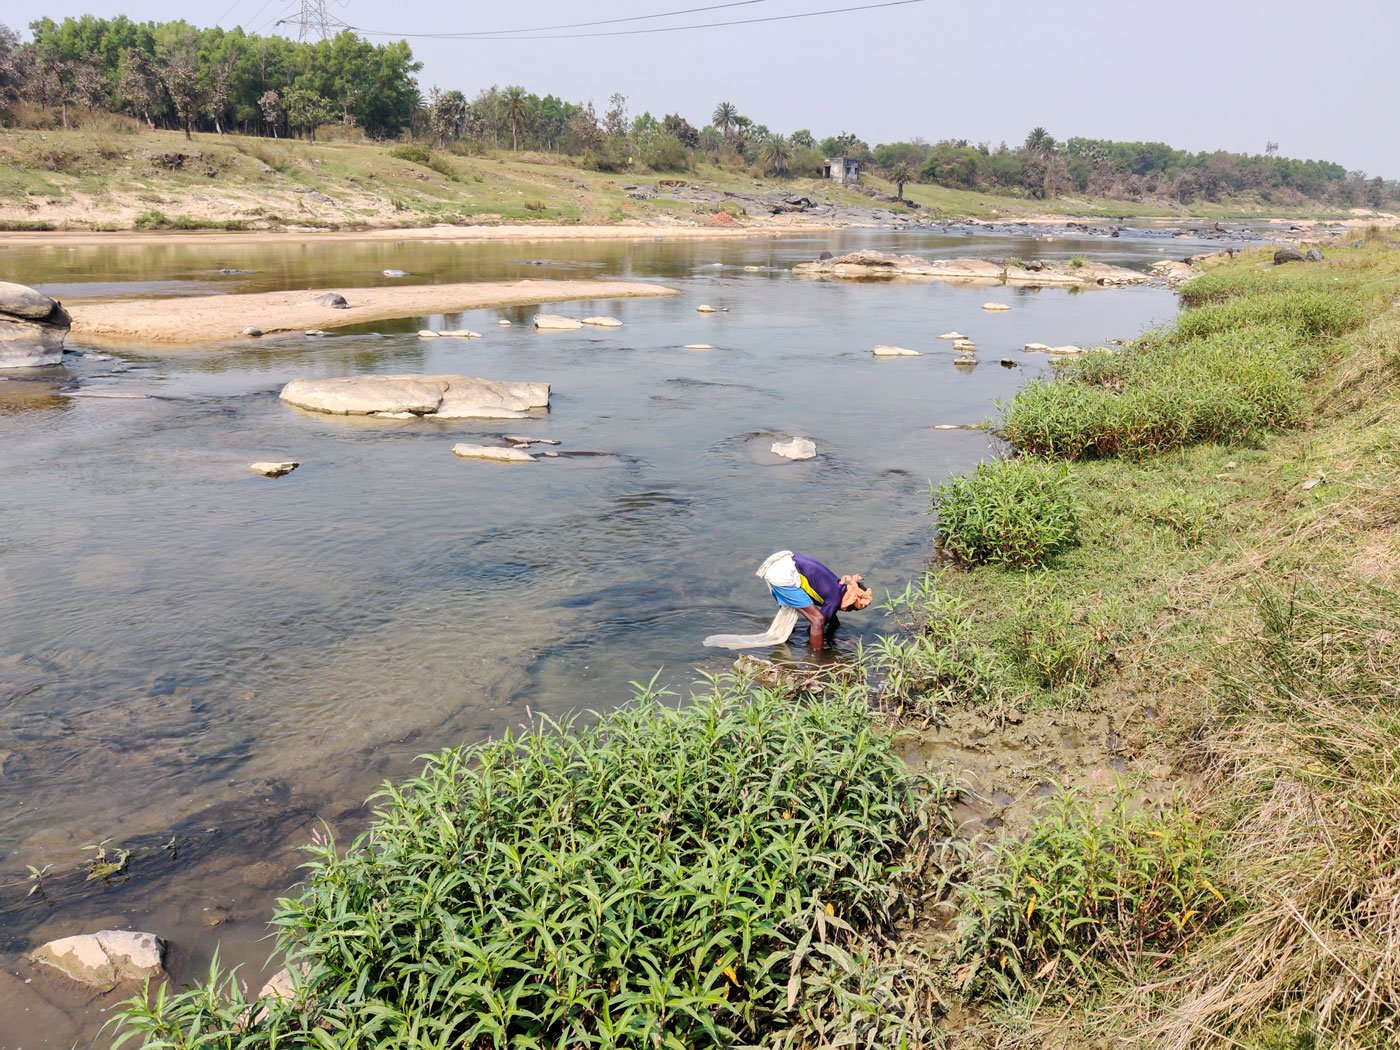 Kangsabati river, which flows through Kaira in Puruliya's Puncha block, is a major source of food for Adivasi families in the village